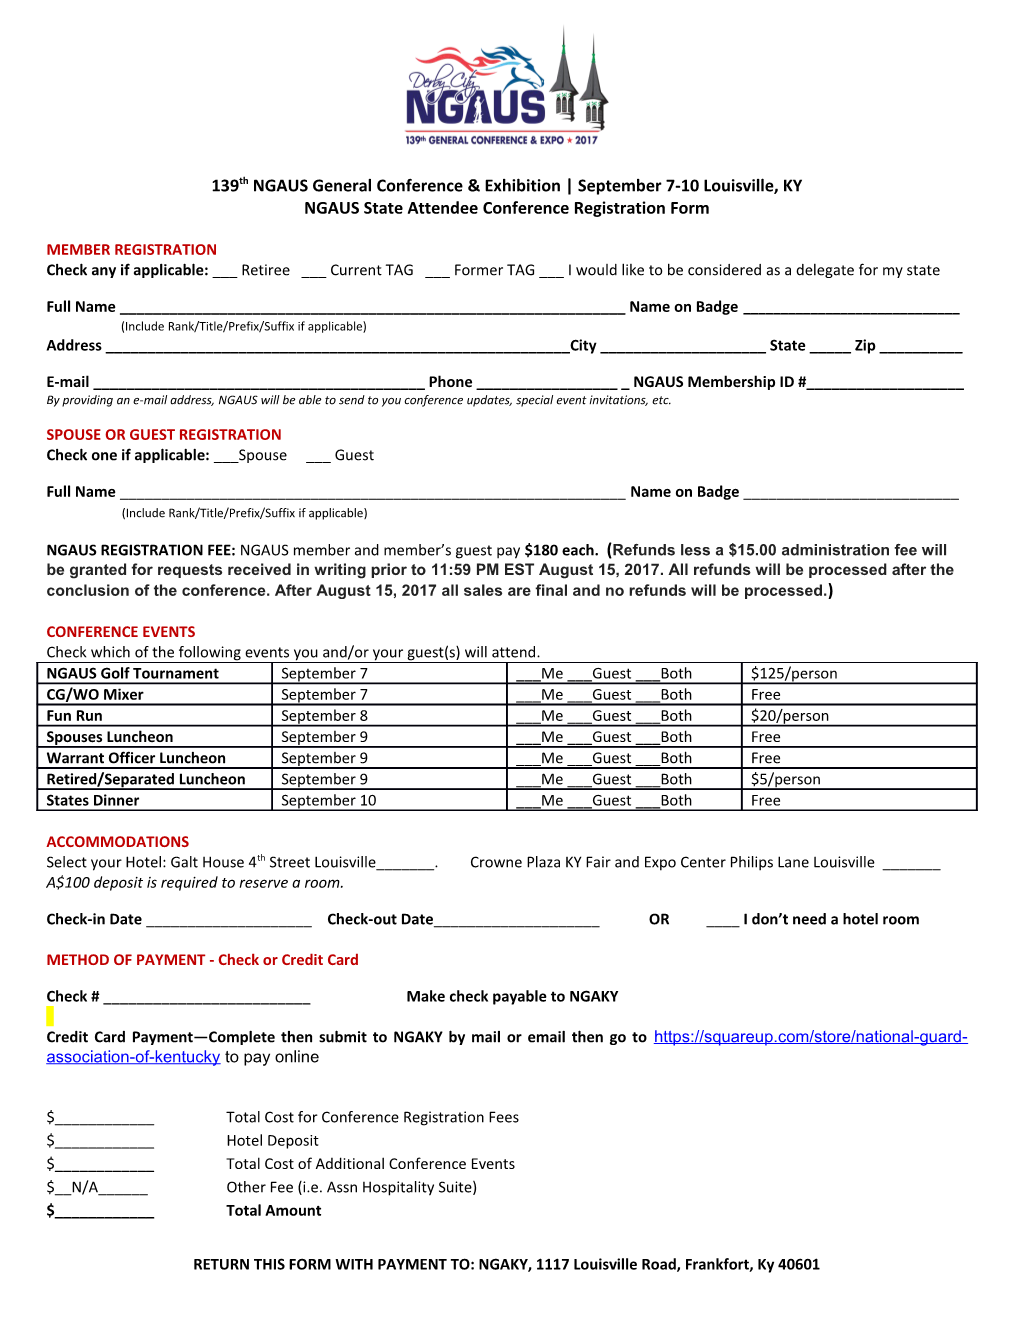 NGAUS State Attendee Conference Registration Form